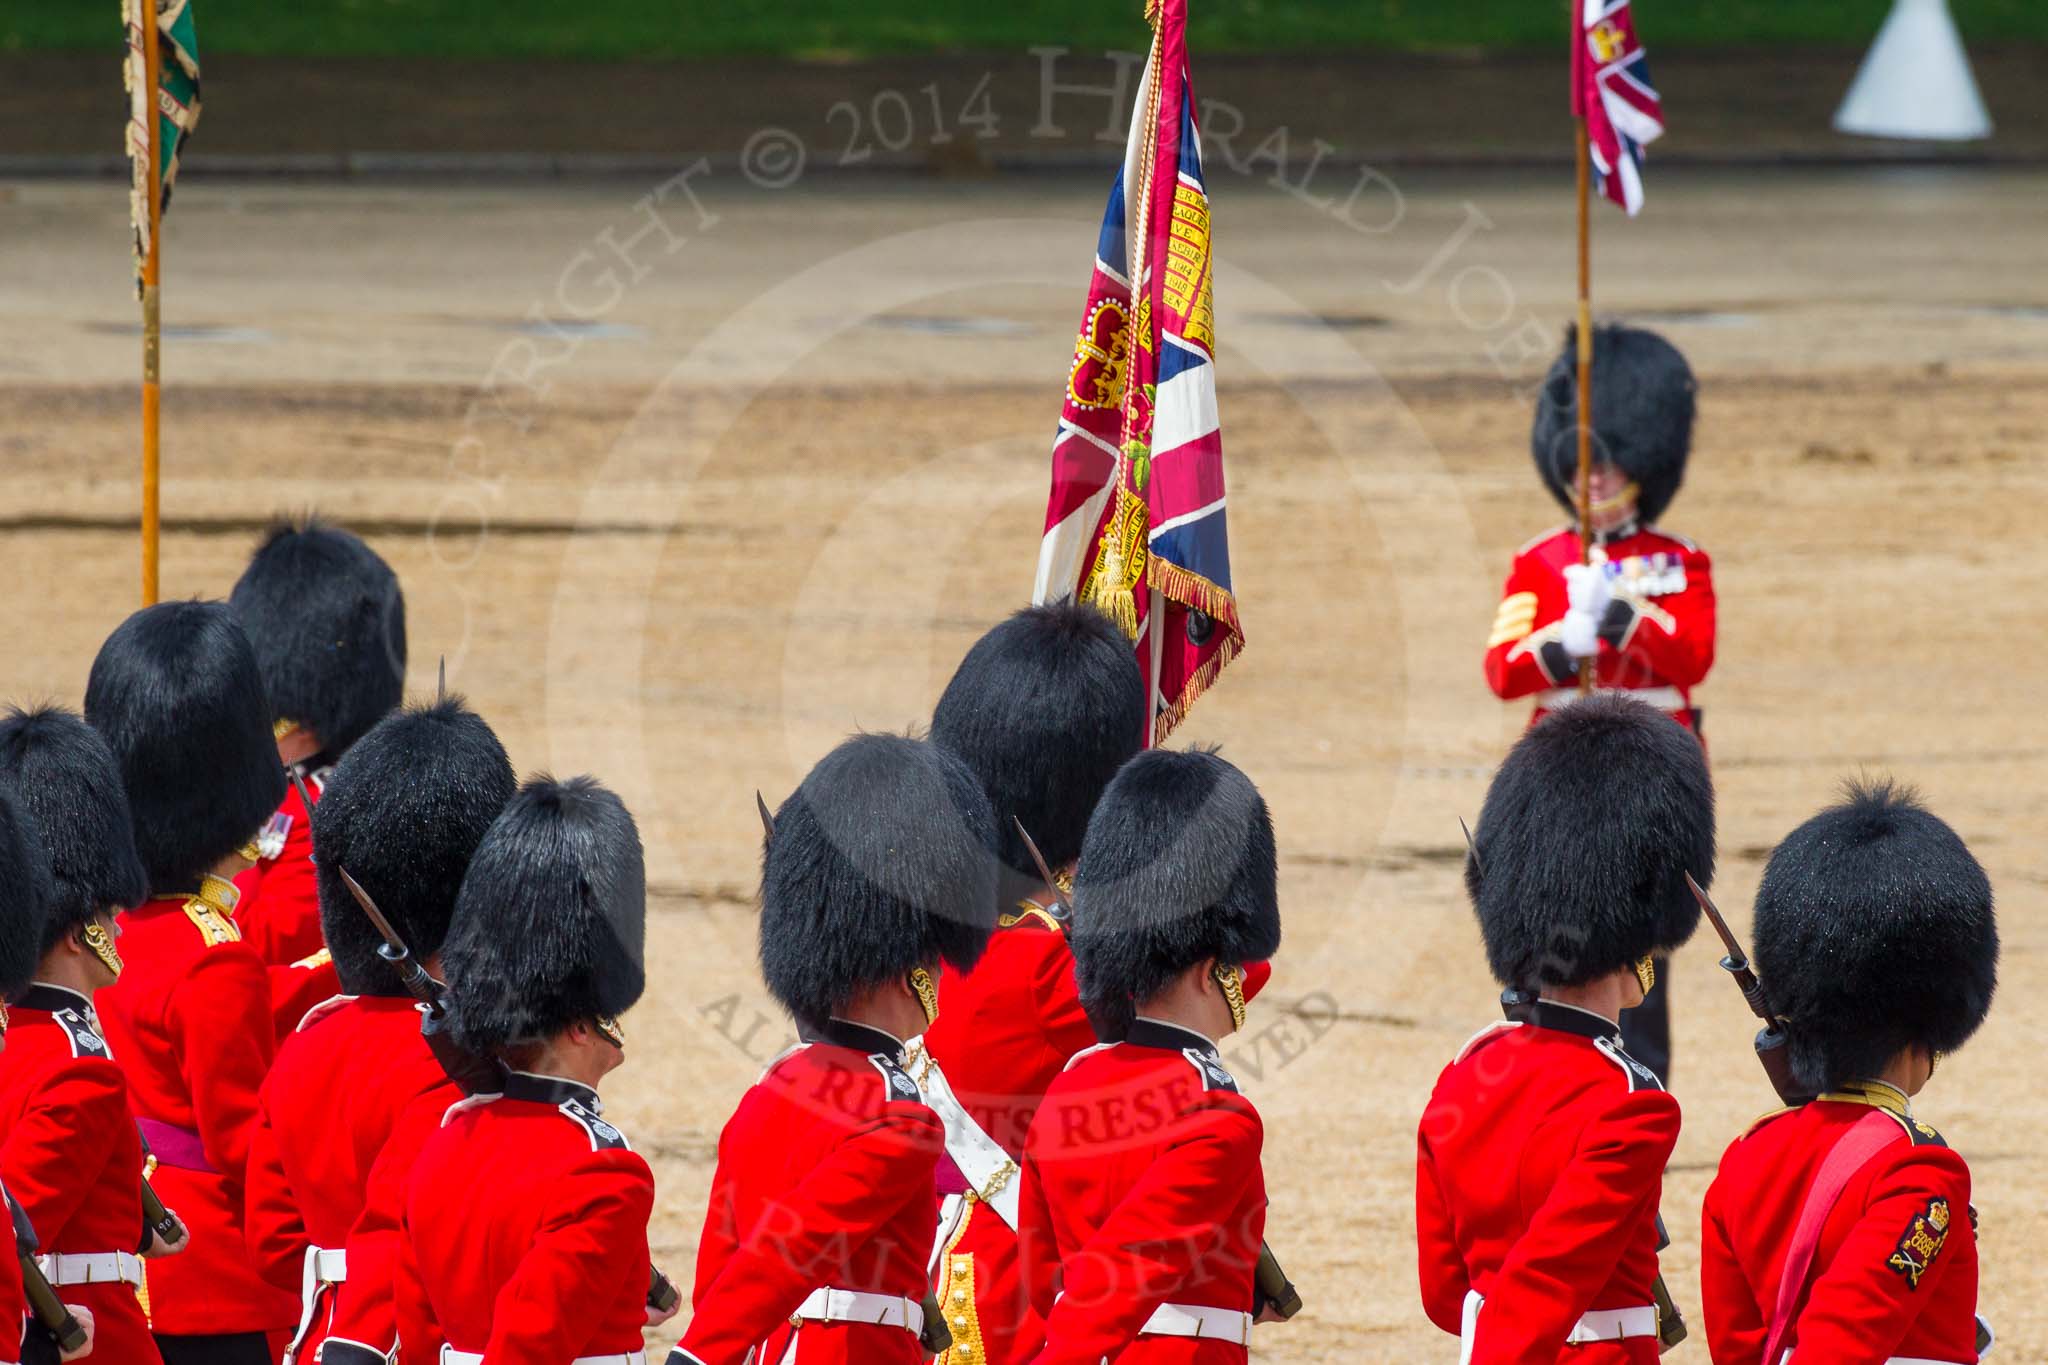 The Colonel's Review 2014.
Horse Guards Parade, Westminster,
London,

United Kingdom,
on 07 June 2014 at 12:10, image #725